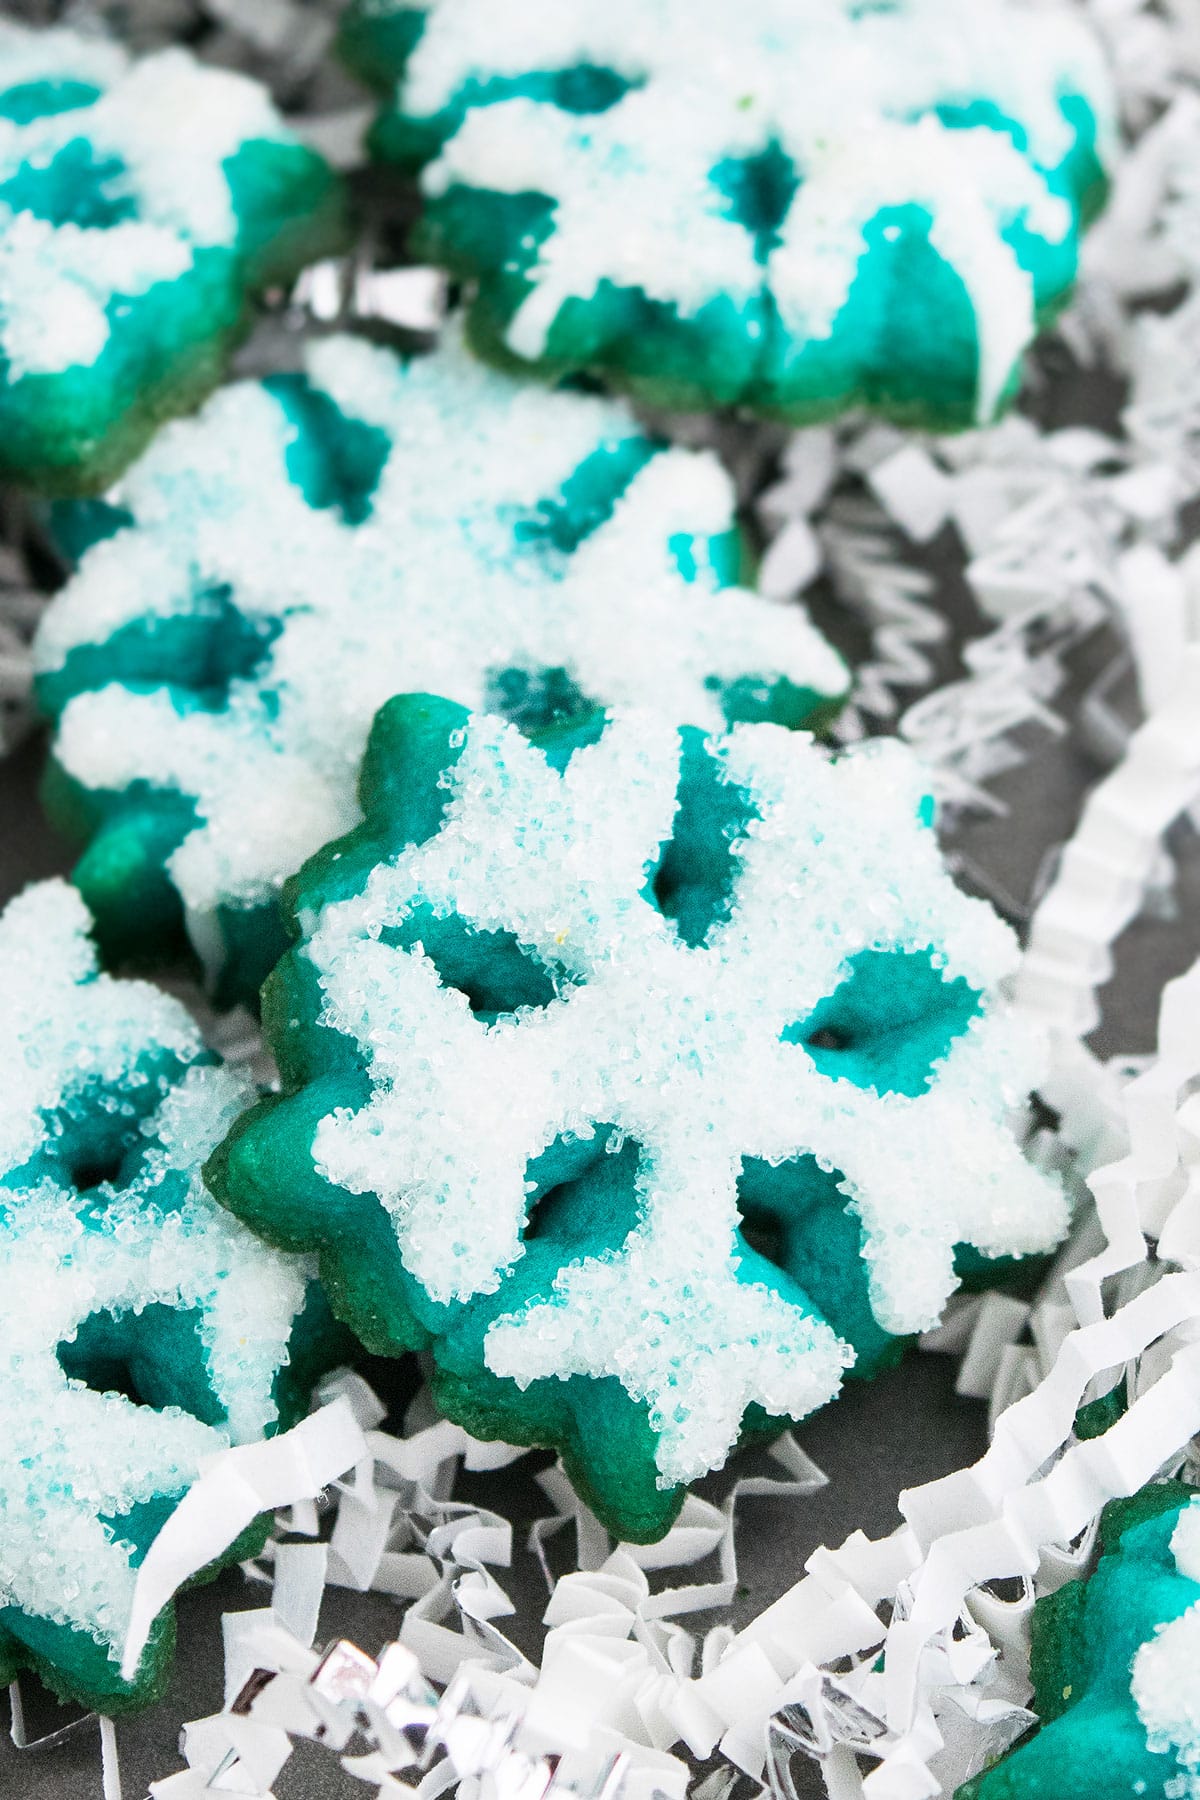 Blue Snowflake Cookies With Sparkling Sugar Made With Cookie Press on Metal Baking Tray. 